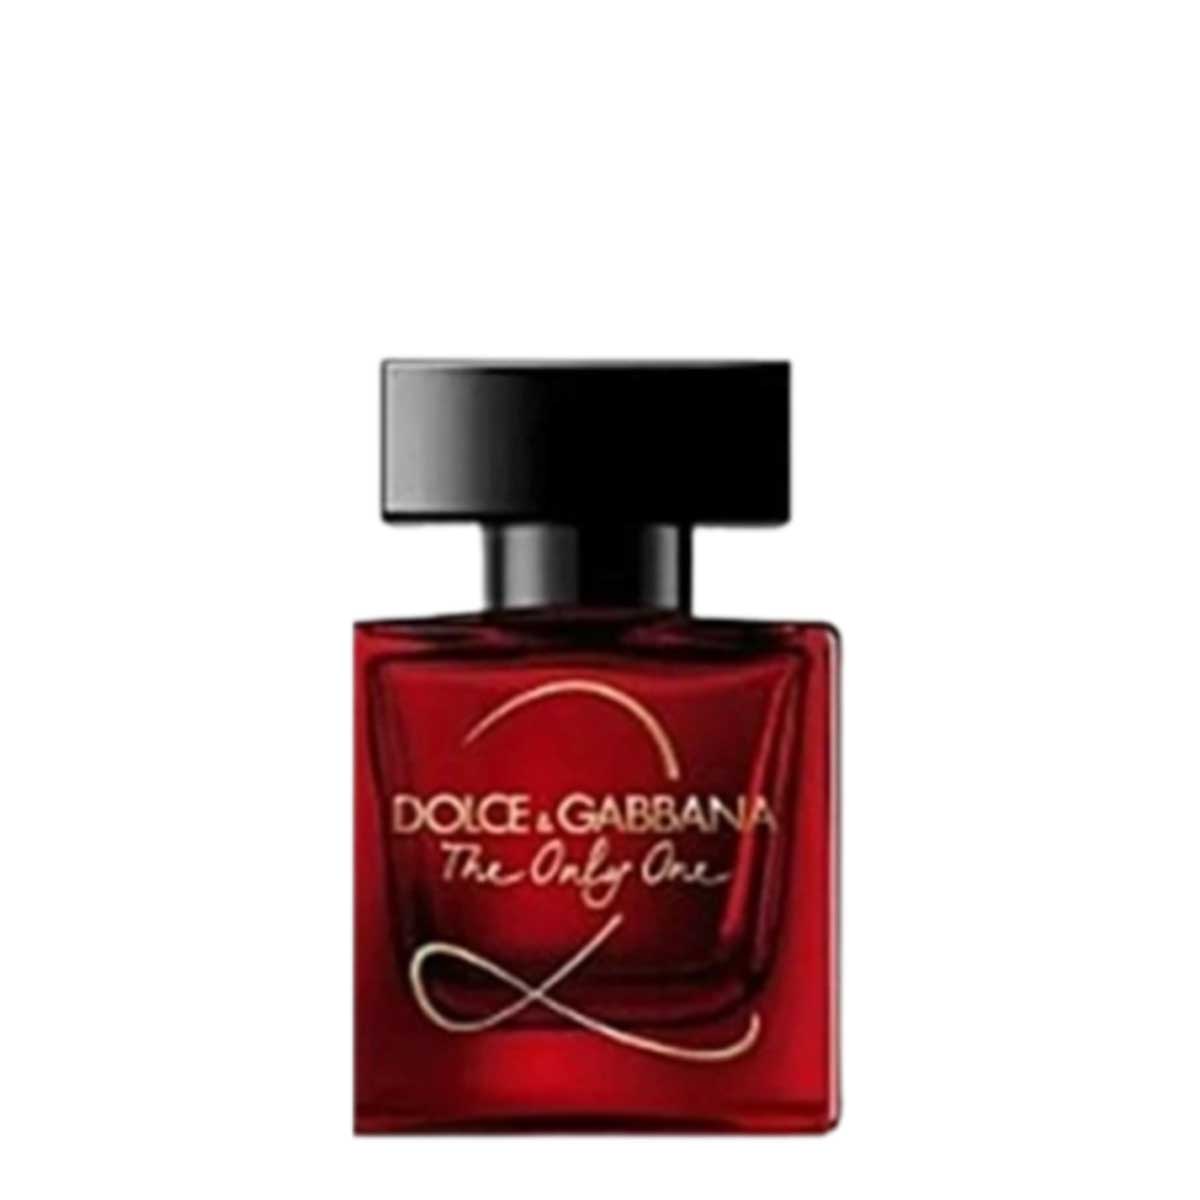 Dolce & Gabbana The Only One 2 EDP Mini